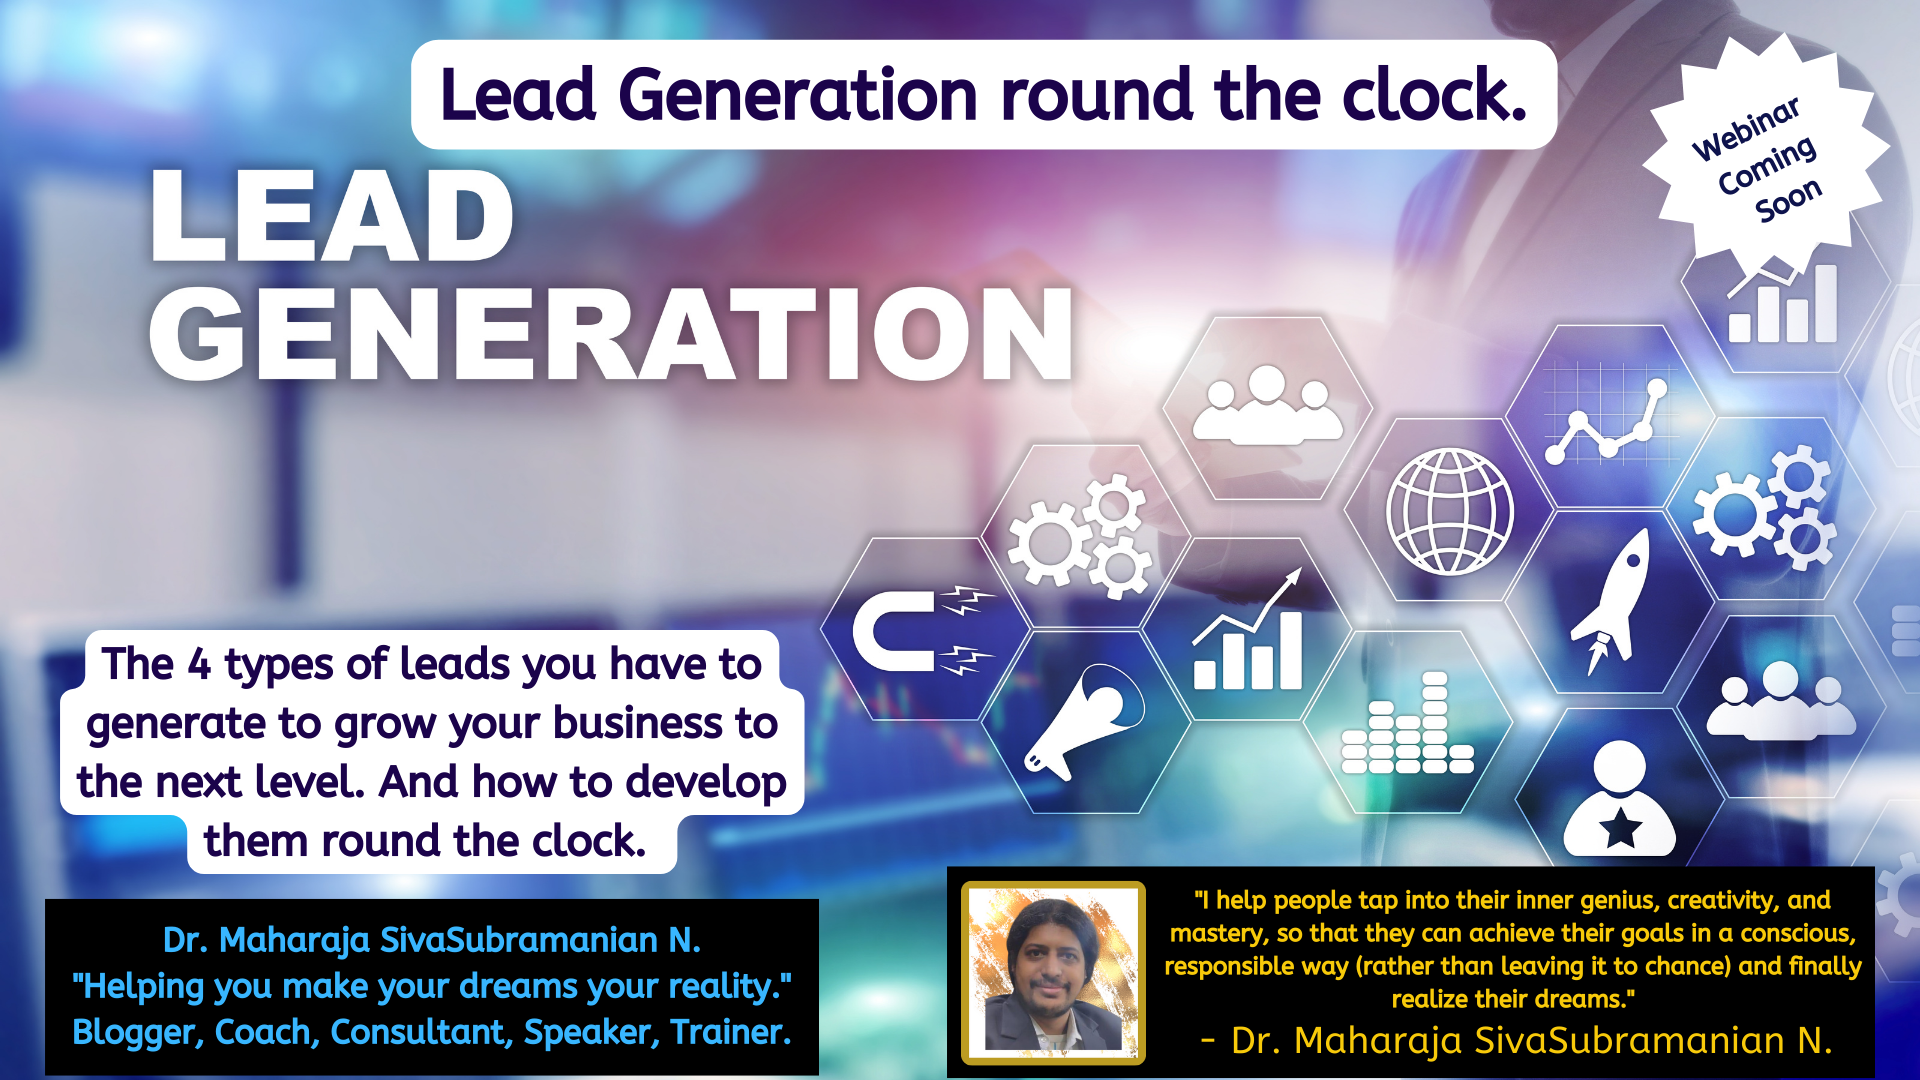 Lead Generation round the clock for Virtual Assistants. – Upcoming free webinar.